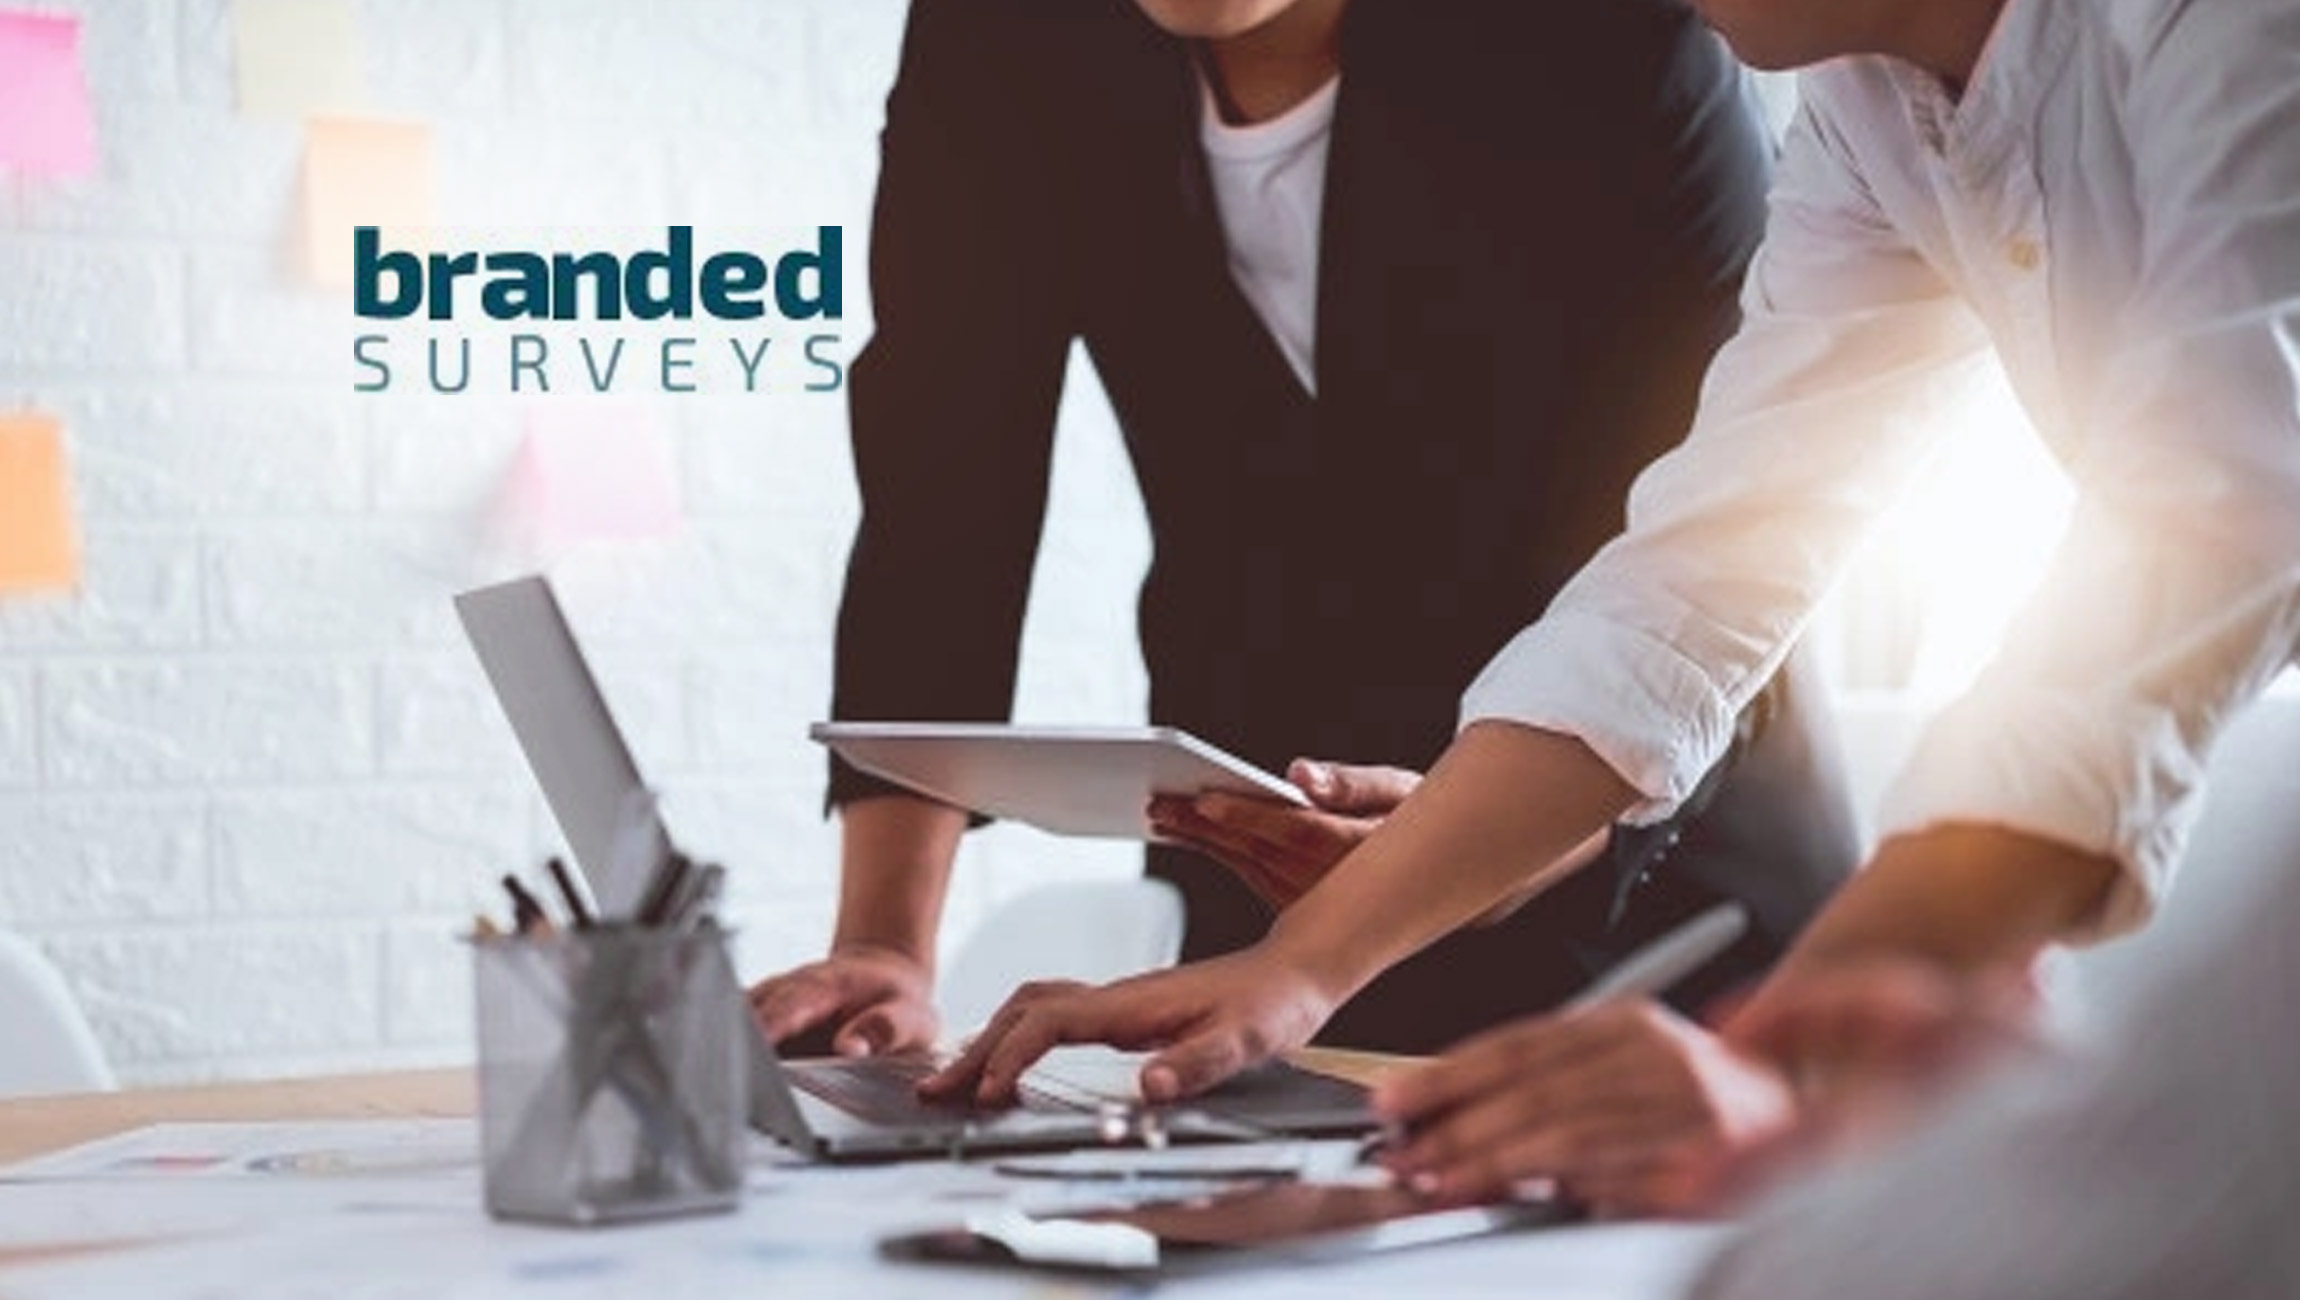 Branded-Research-Inc.-Has-Added-New-Online-Paid-Surveys-to-Their-Online-Platform